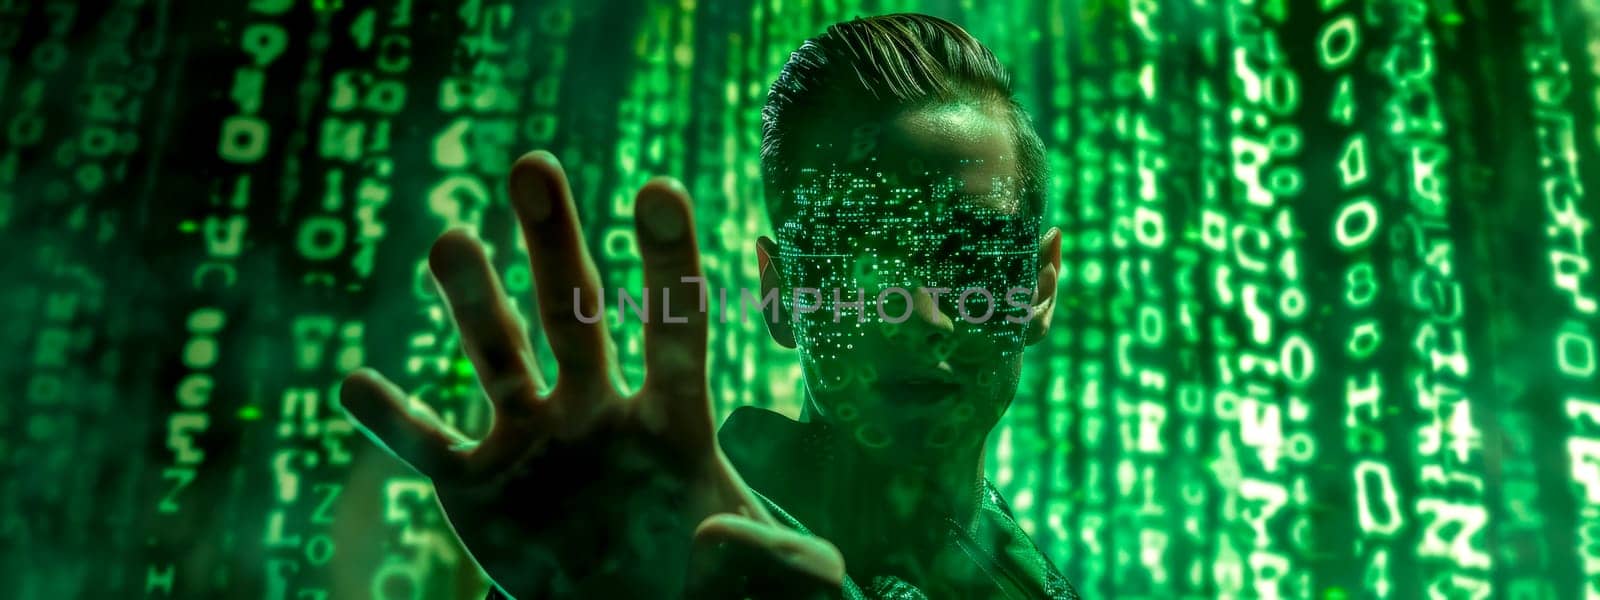 human blends with green binary code lines on a digital interface